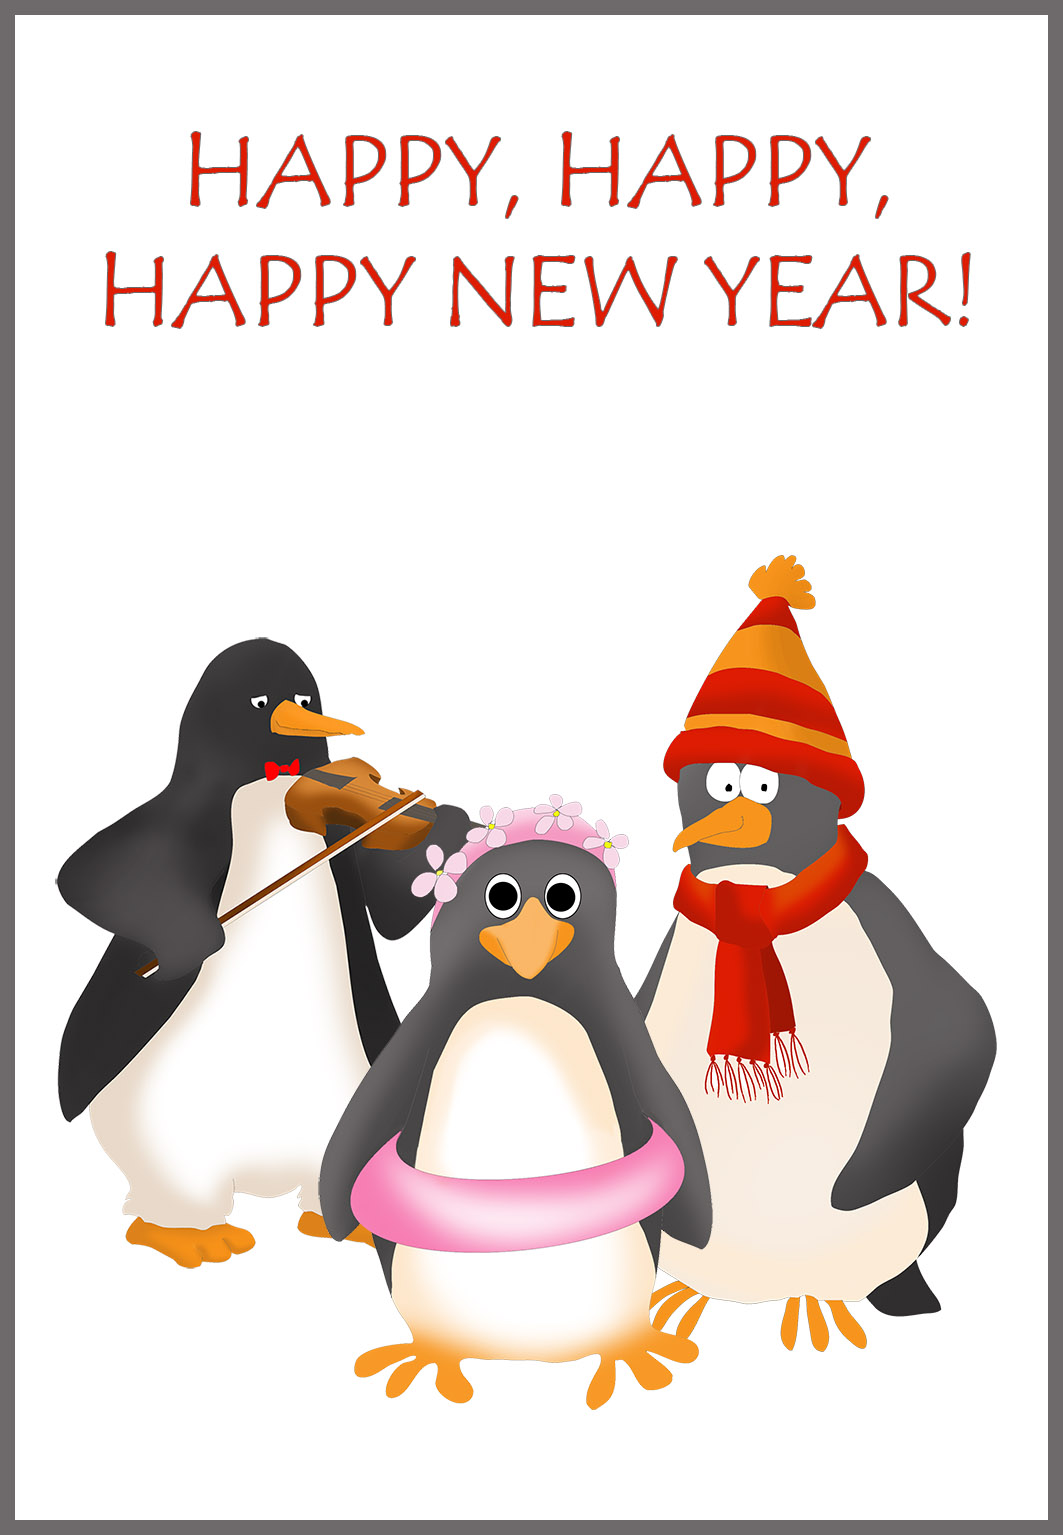 penguins wishing you a happy New Year